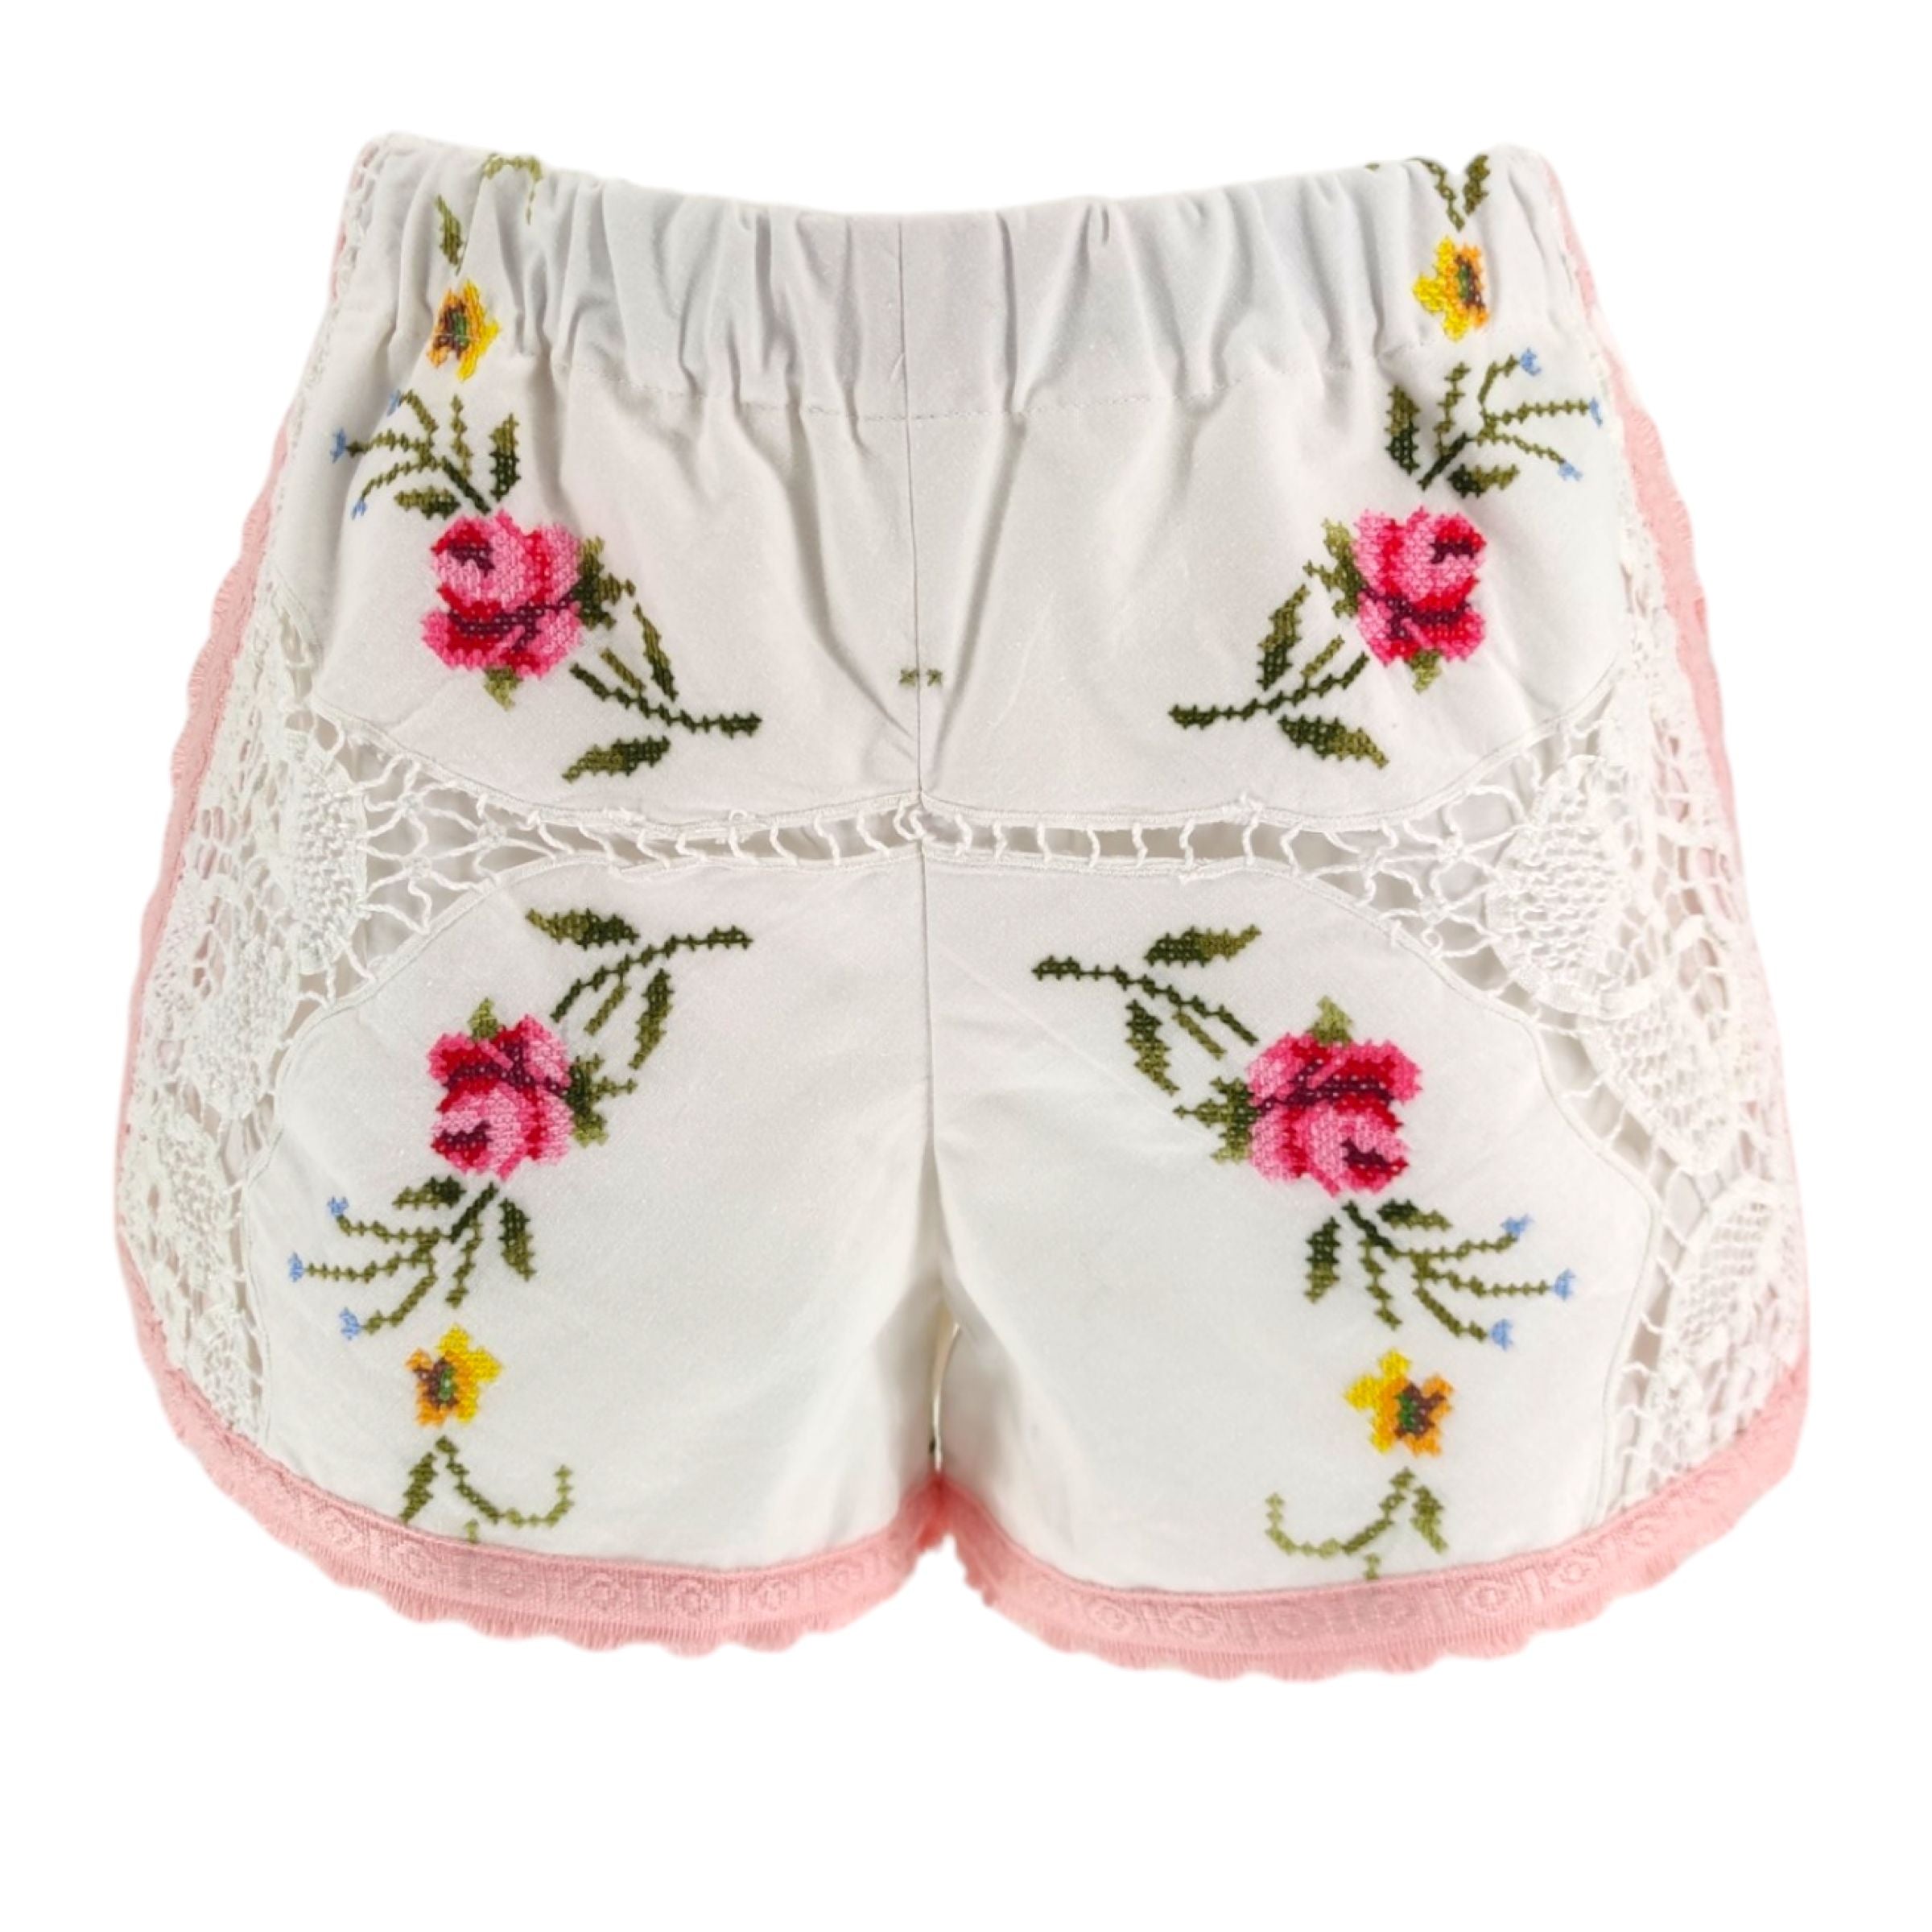 Women's Embroidery Shorts White/Soft Pink 